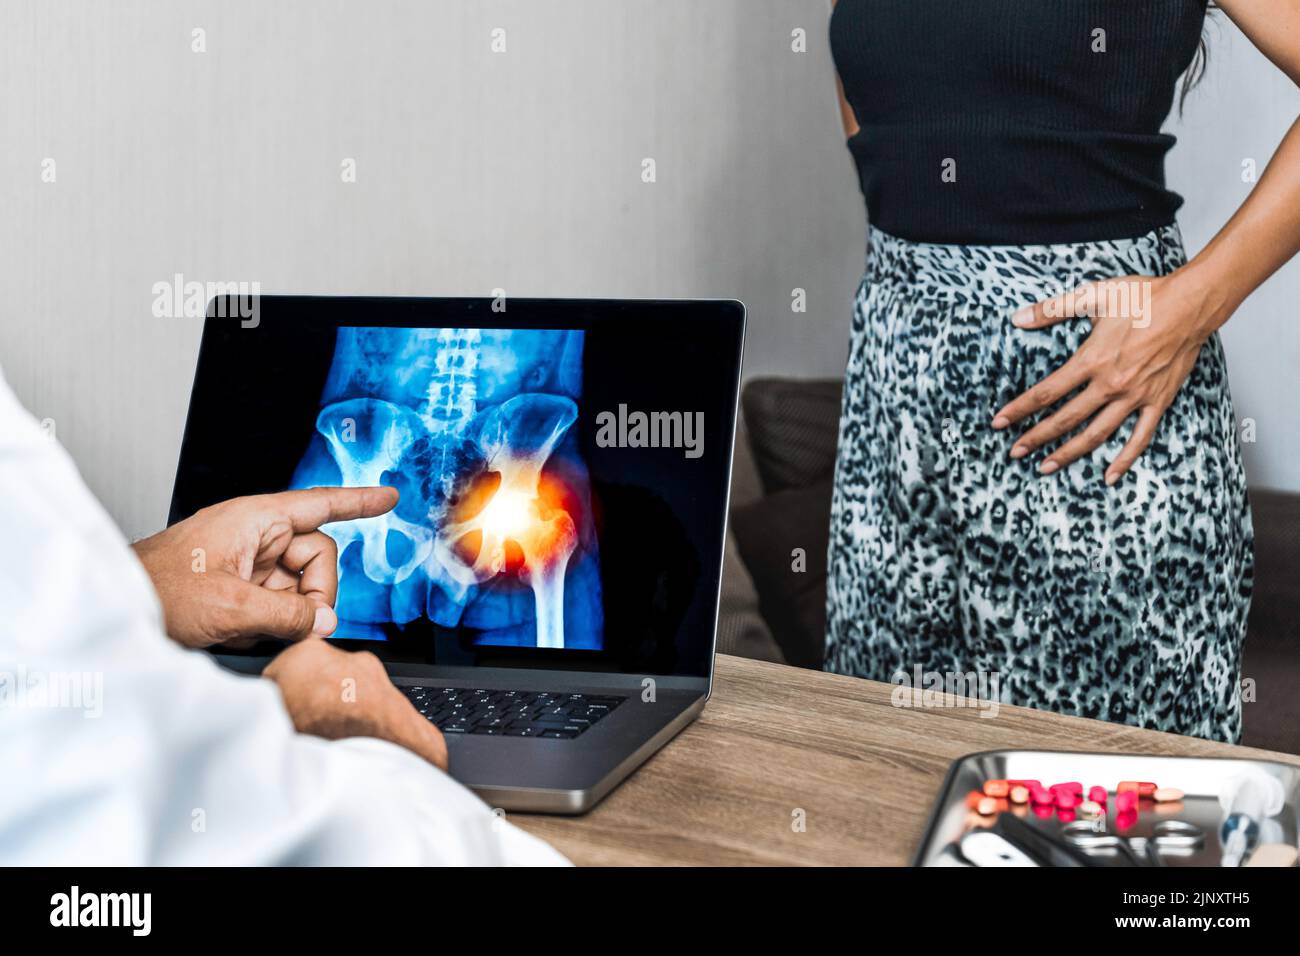 Doctor showing a x-ray of pain in the hips on a laptop. Woman patient in the background Stock Photo